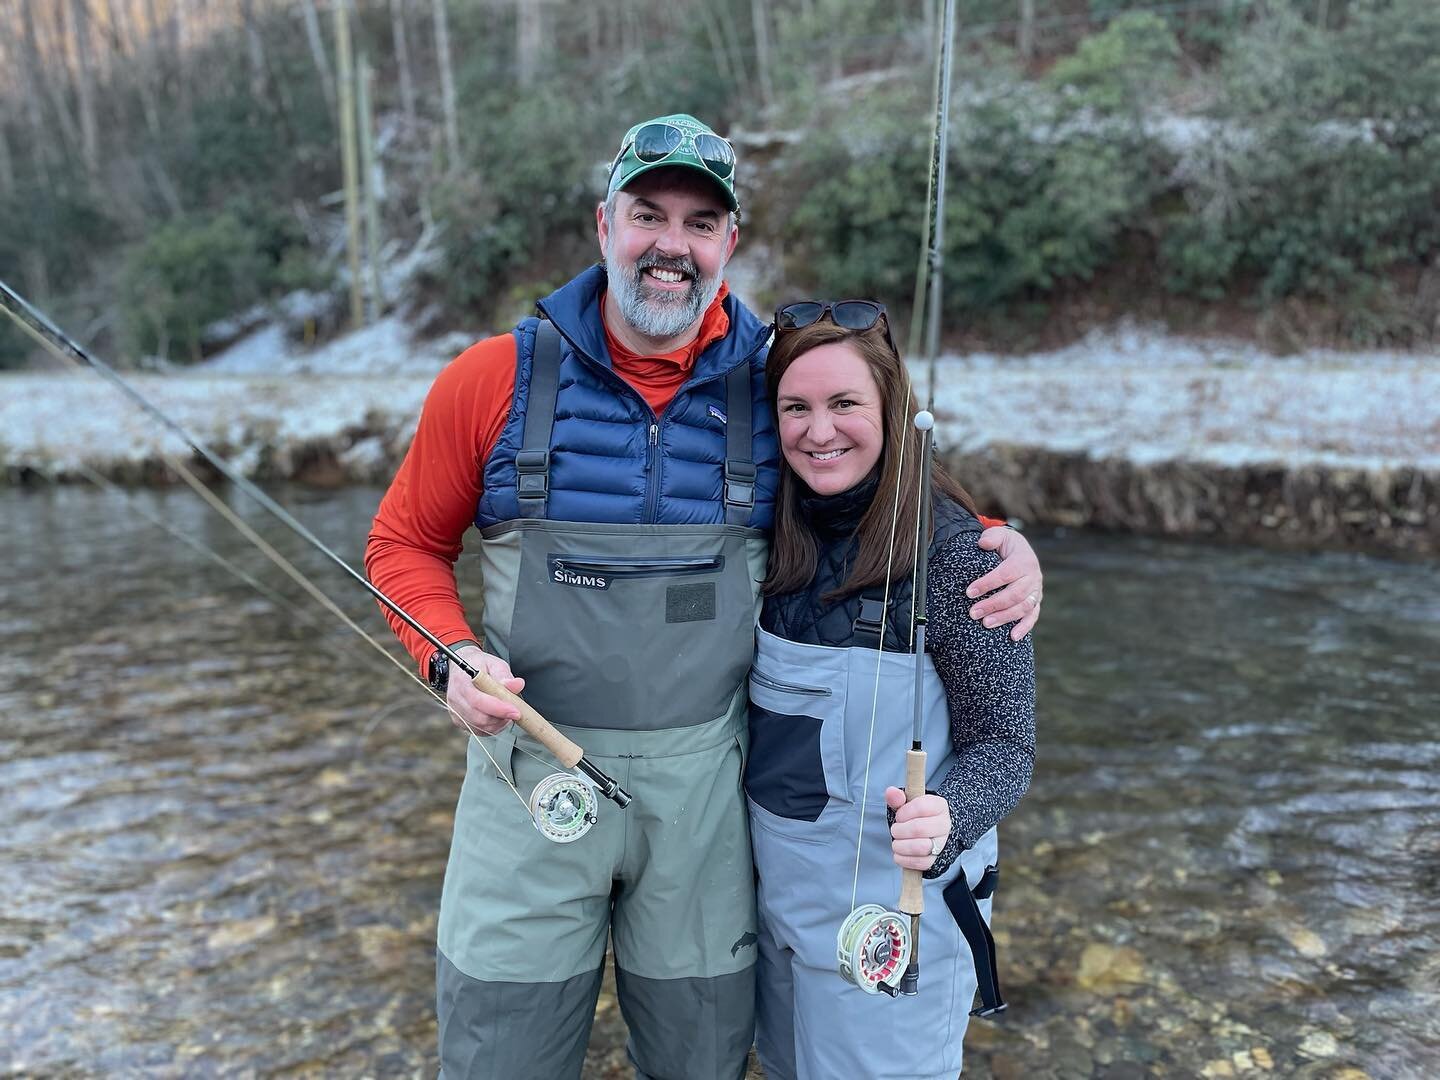 Better late posting than never.  Pretty grateful for this wonderful wife of mine and some time away in the mountains a couple weekends ago